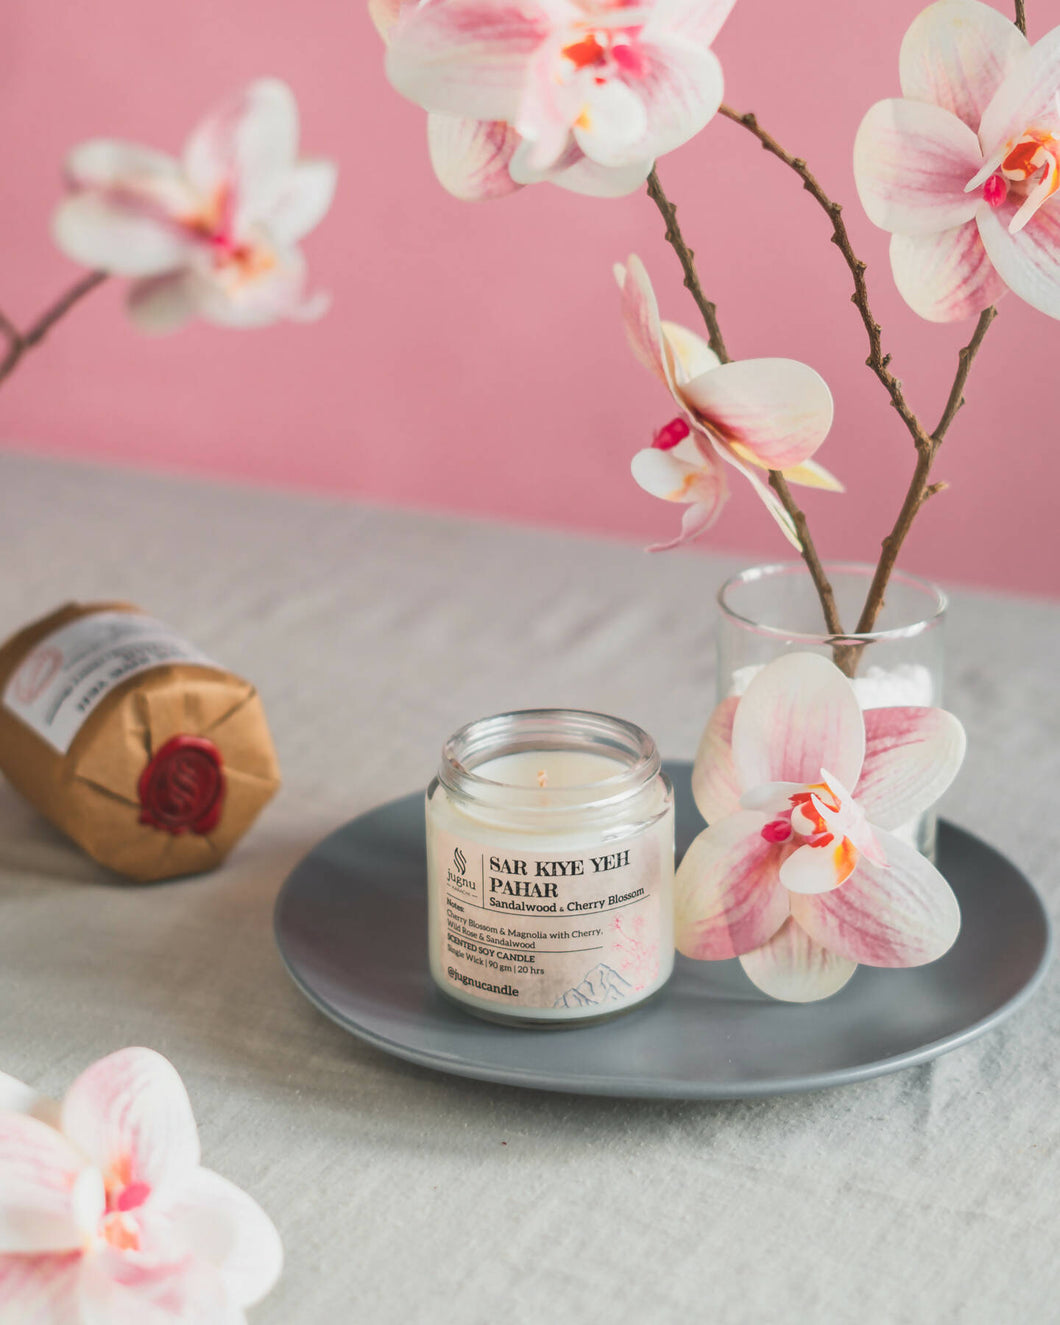 Sar Kiye Yeh Pahar - Hand-poured Scented Soy Candle